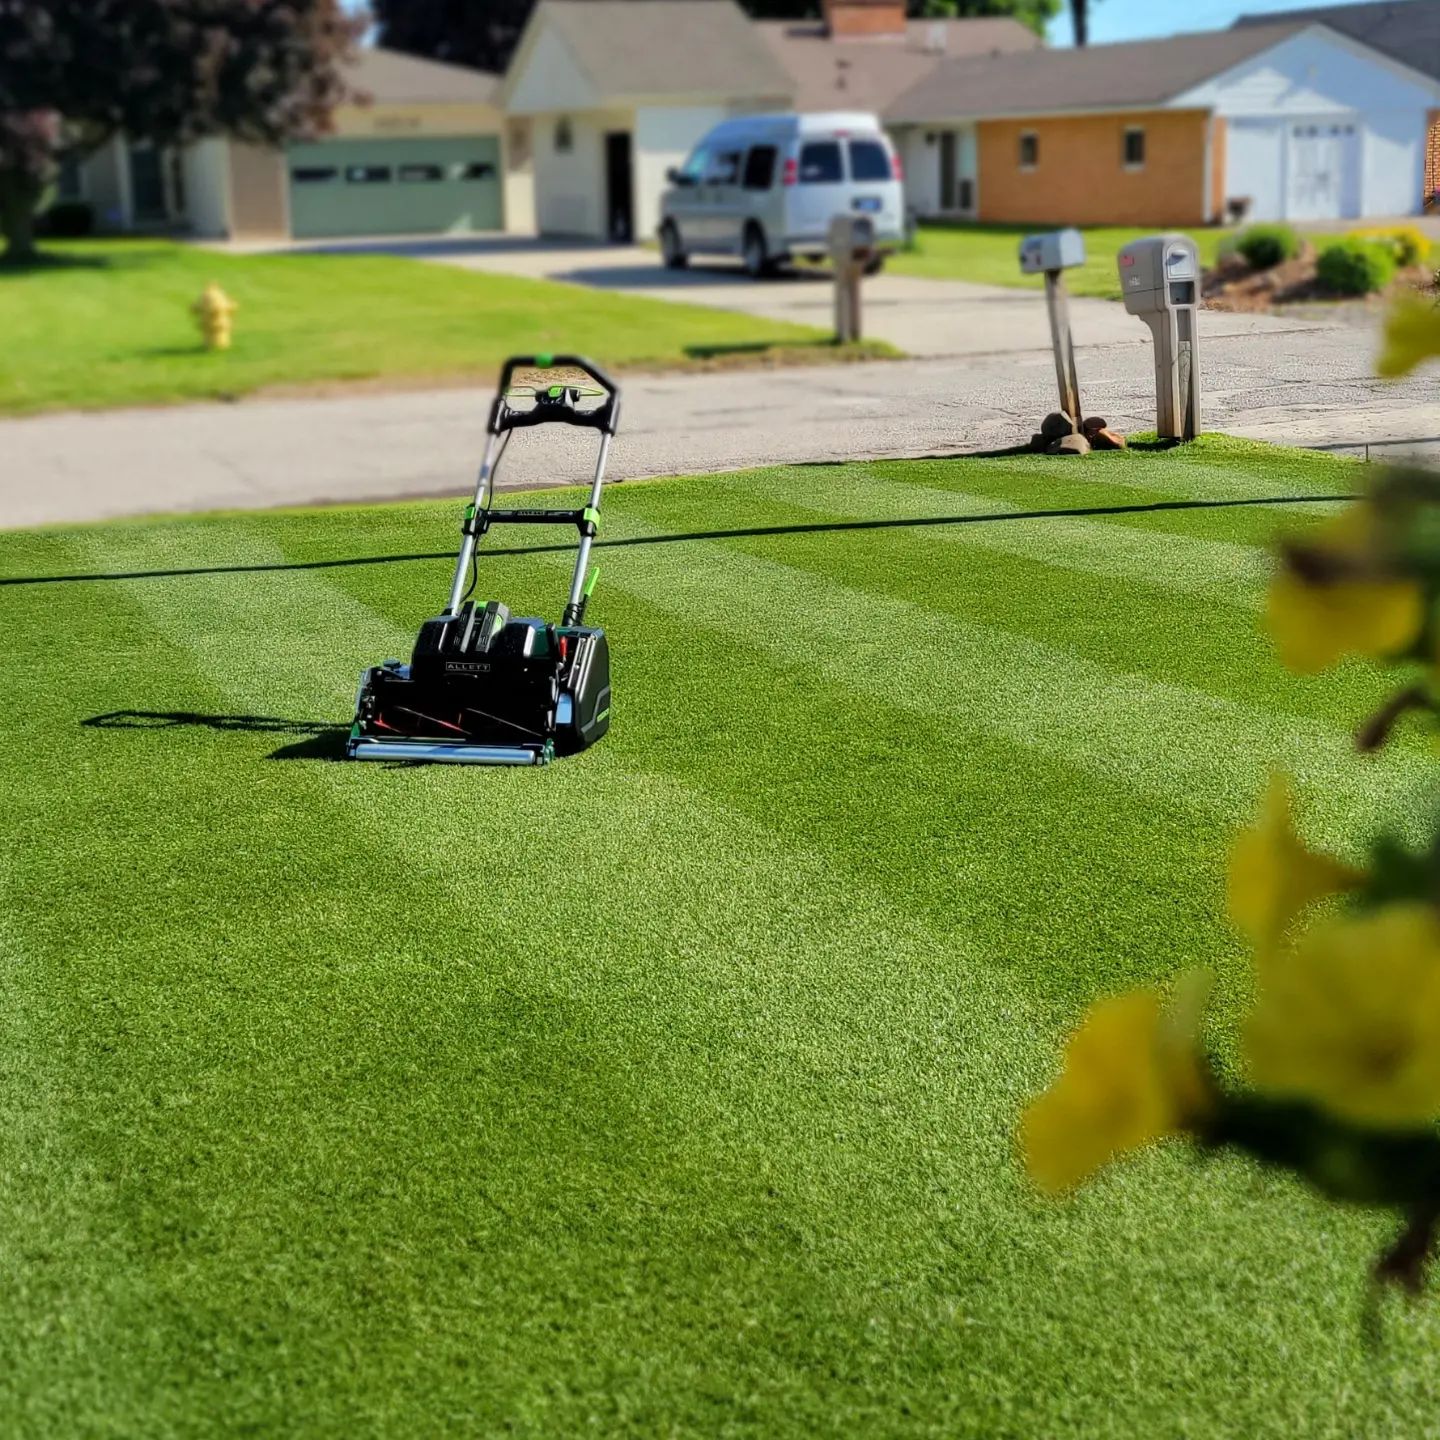 Battery-Powered Lawn Care Equipment: Is it the Future?